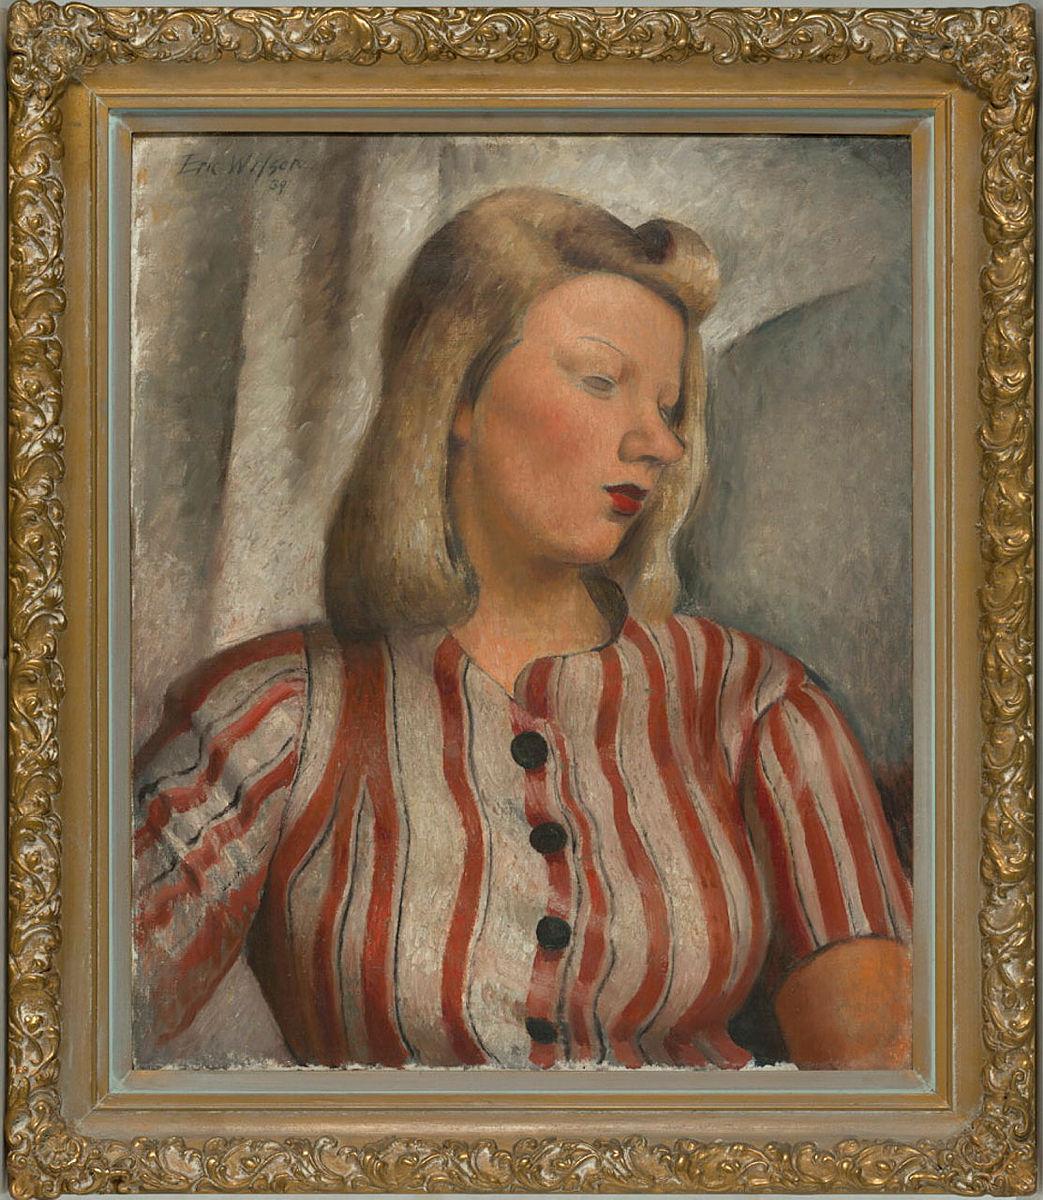 Artwork Westminster girl this artwork made of Oil on canvas, created in 1937-01-01